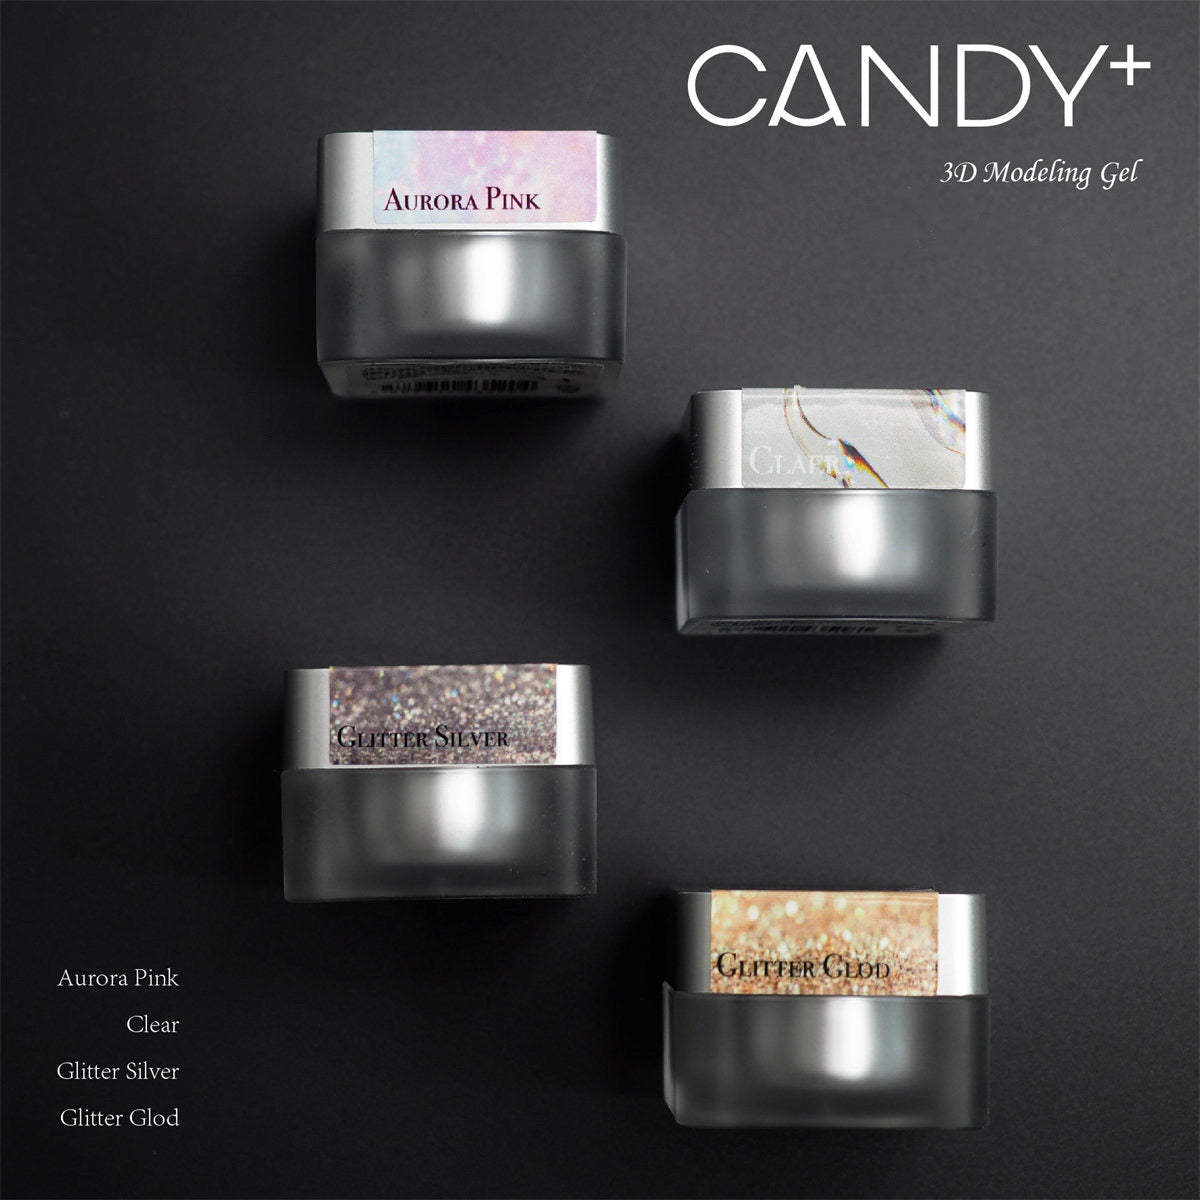 CANDY+ 3D Modelling Gel  [NO extra discount]